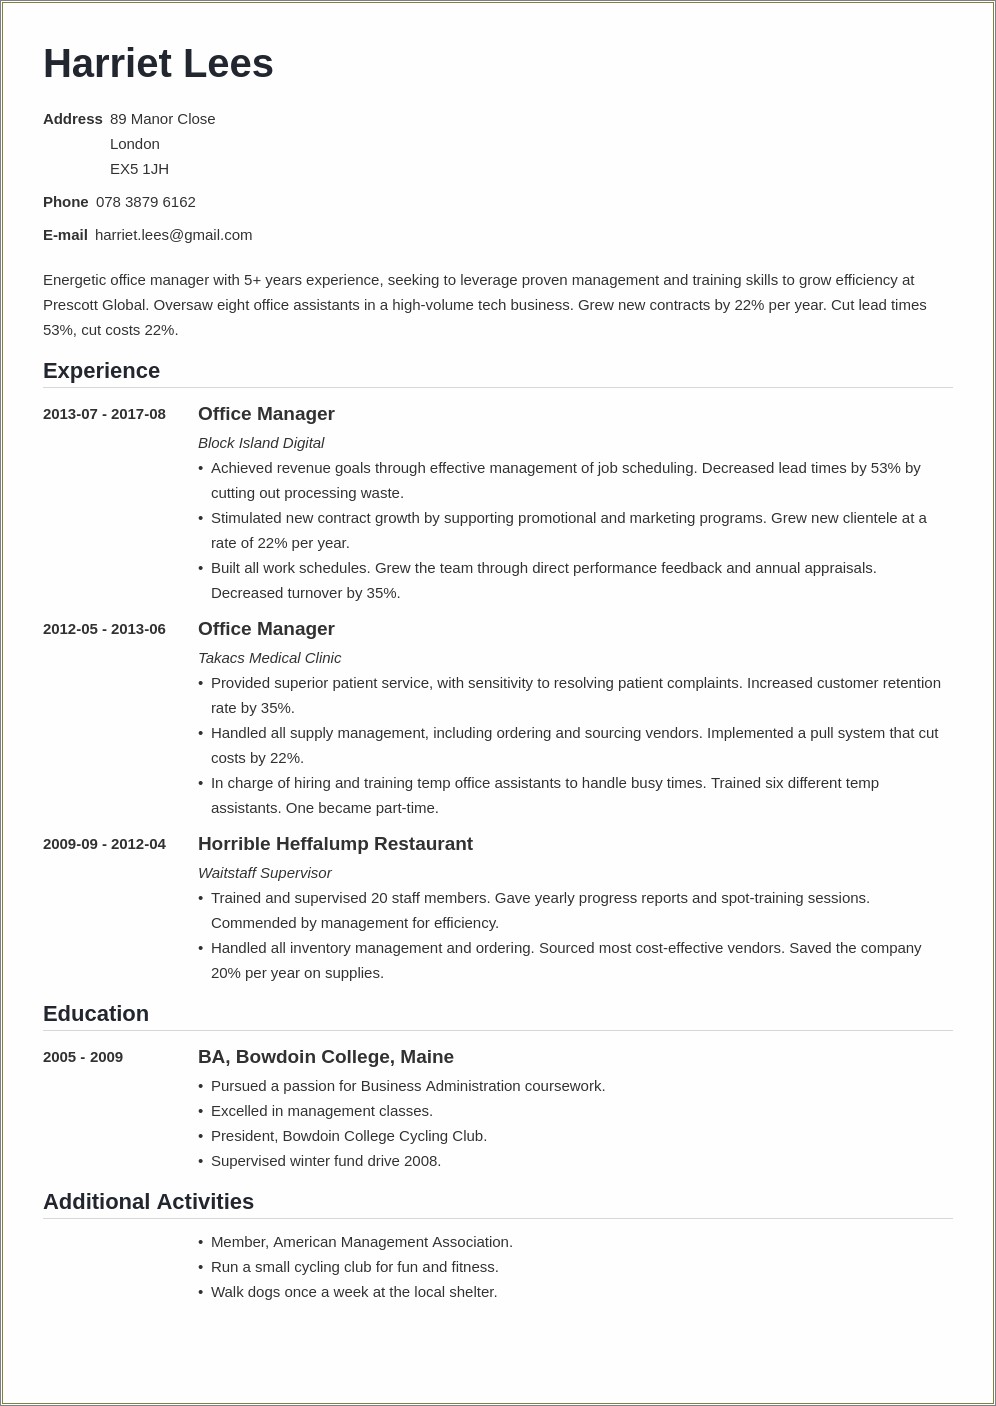 Administrative Assistant Office Manager Resume Professional Summary